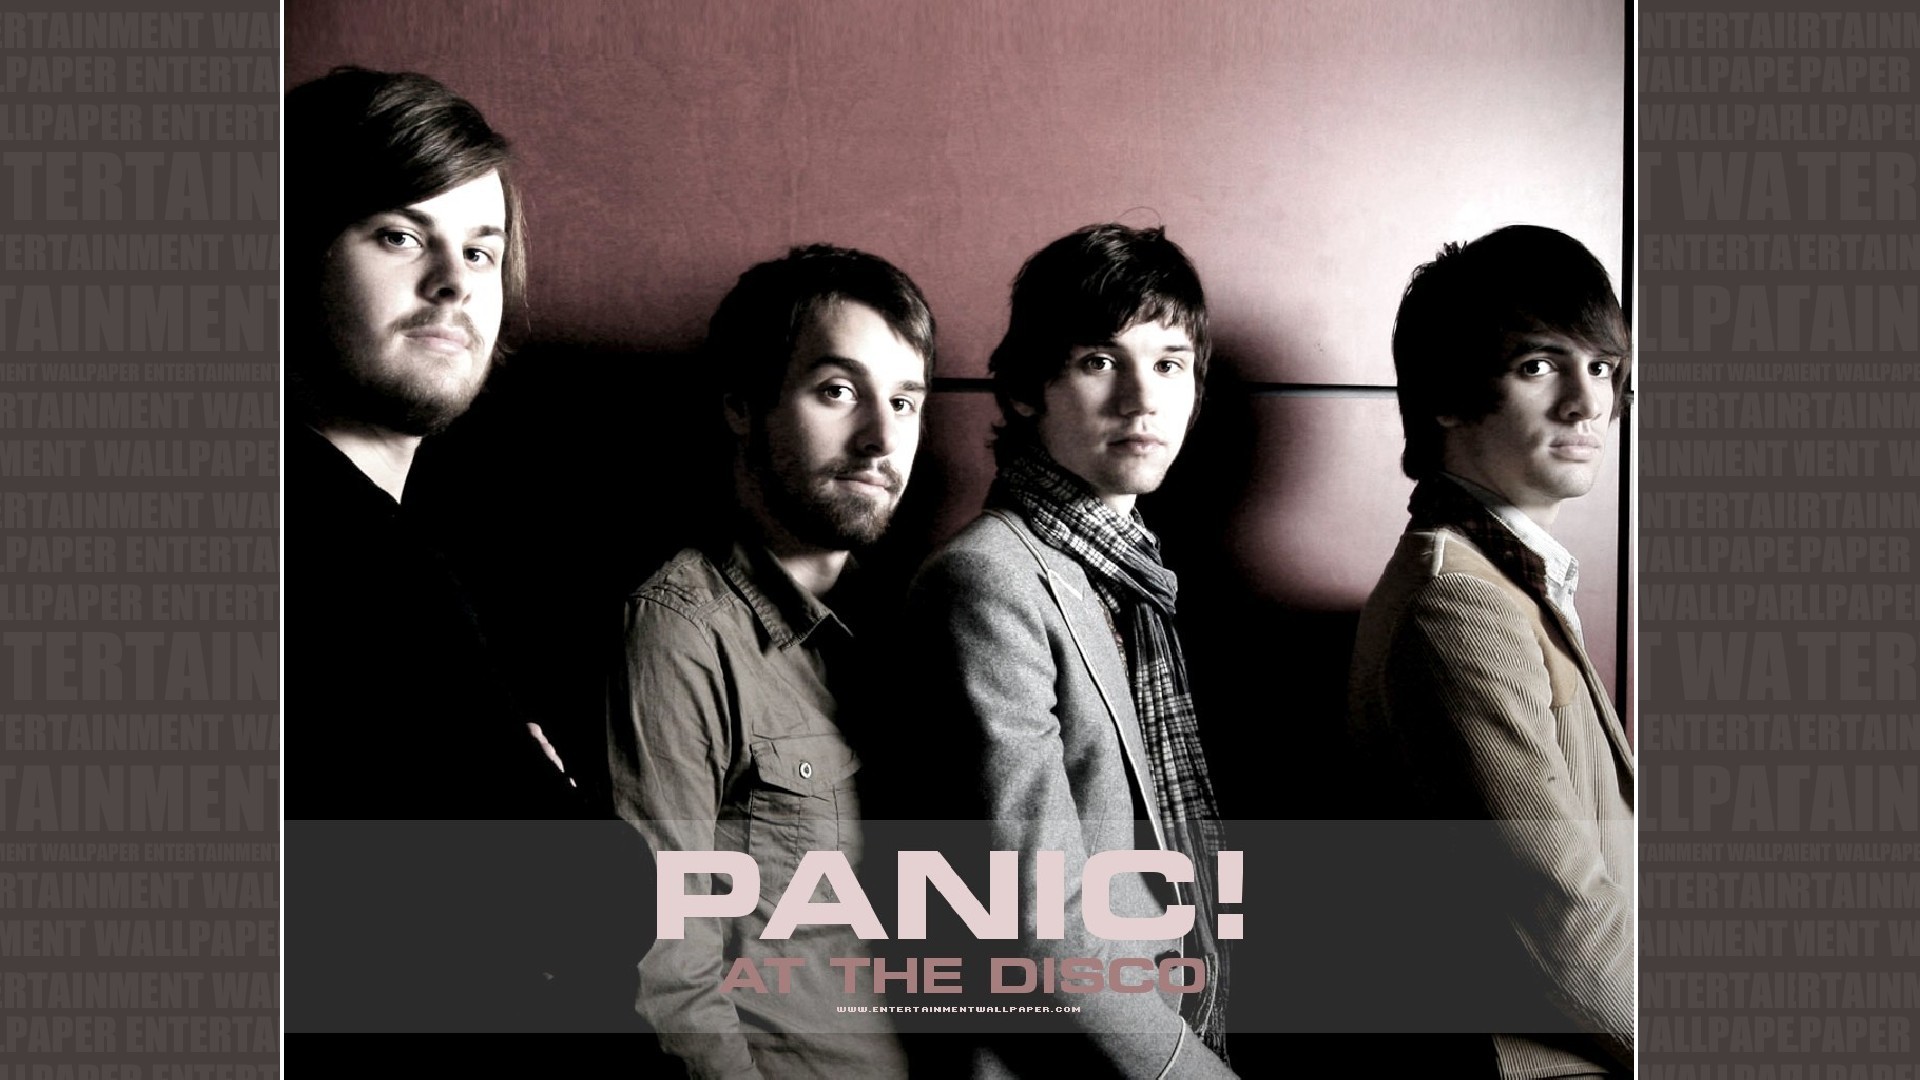 1920x1080 Panic At the Disco Wallpaper - Original size, download now.